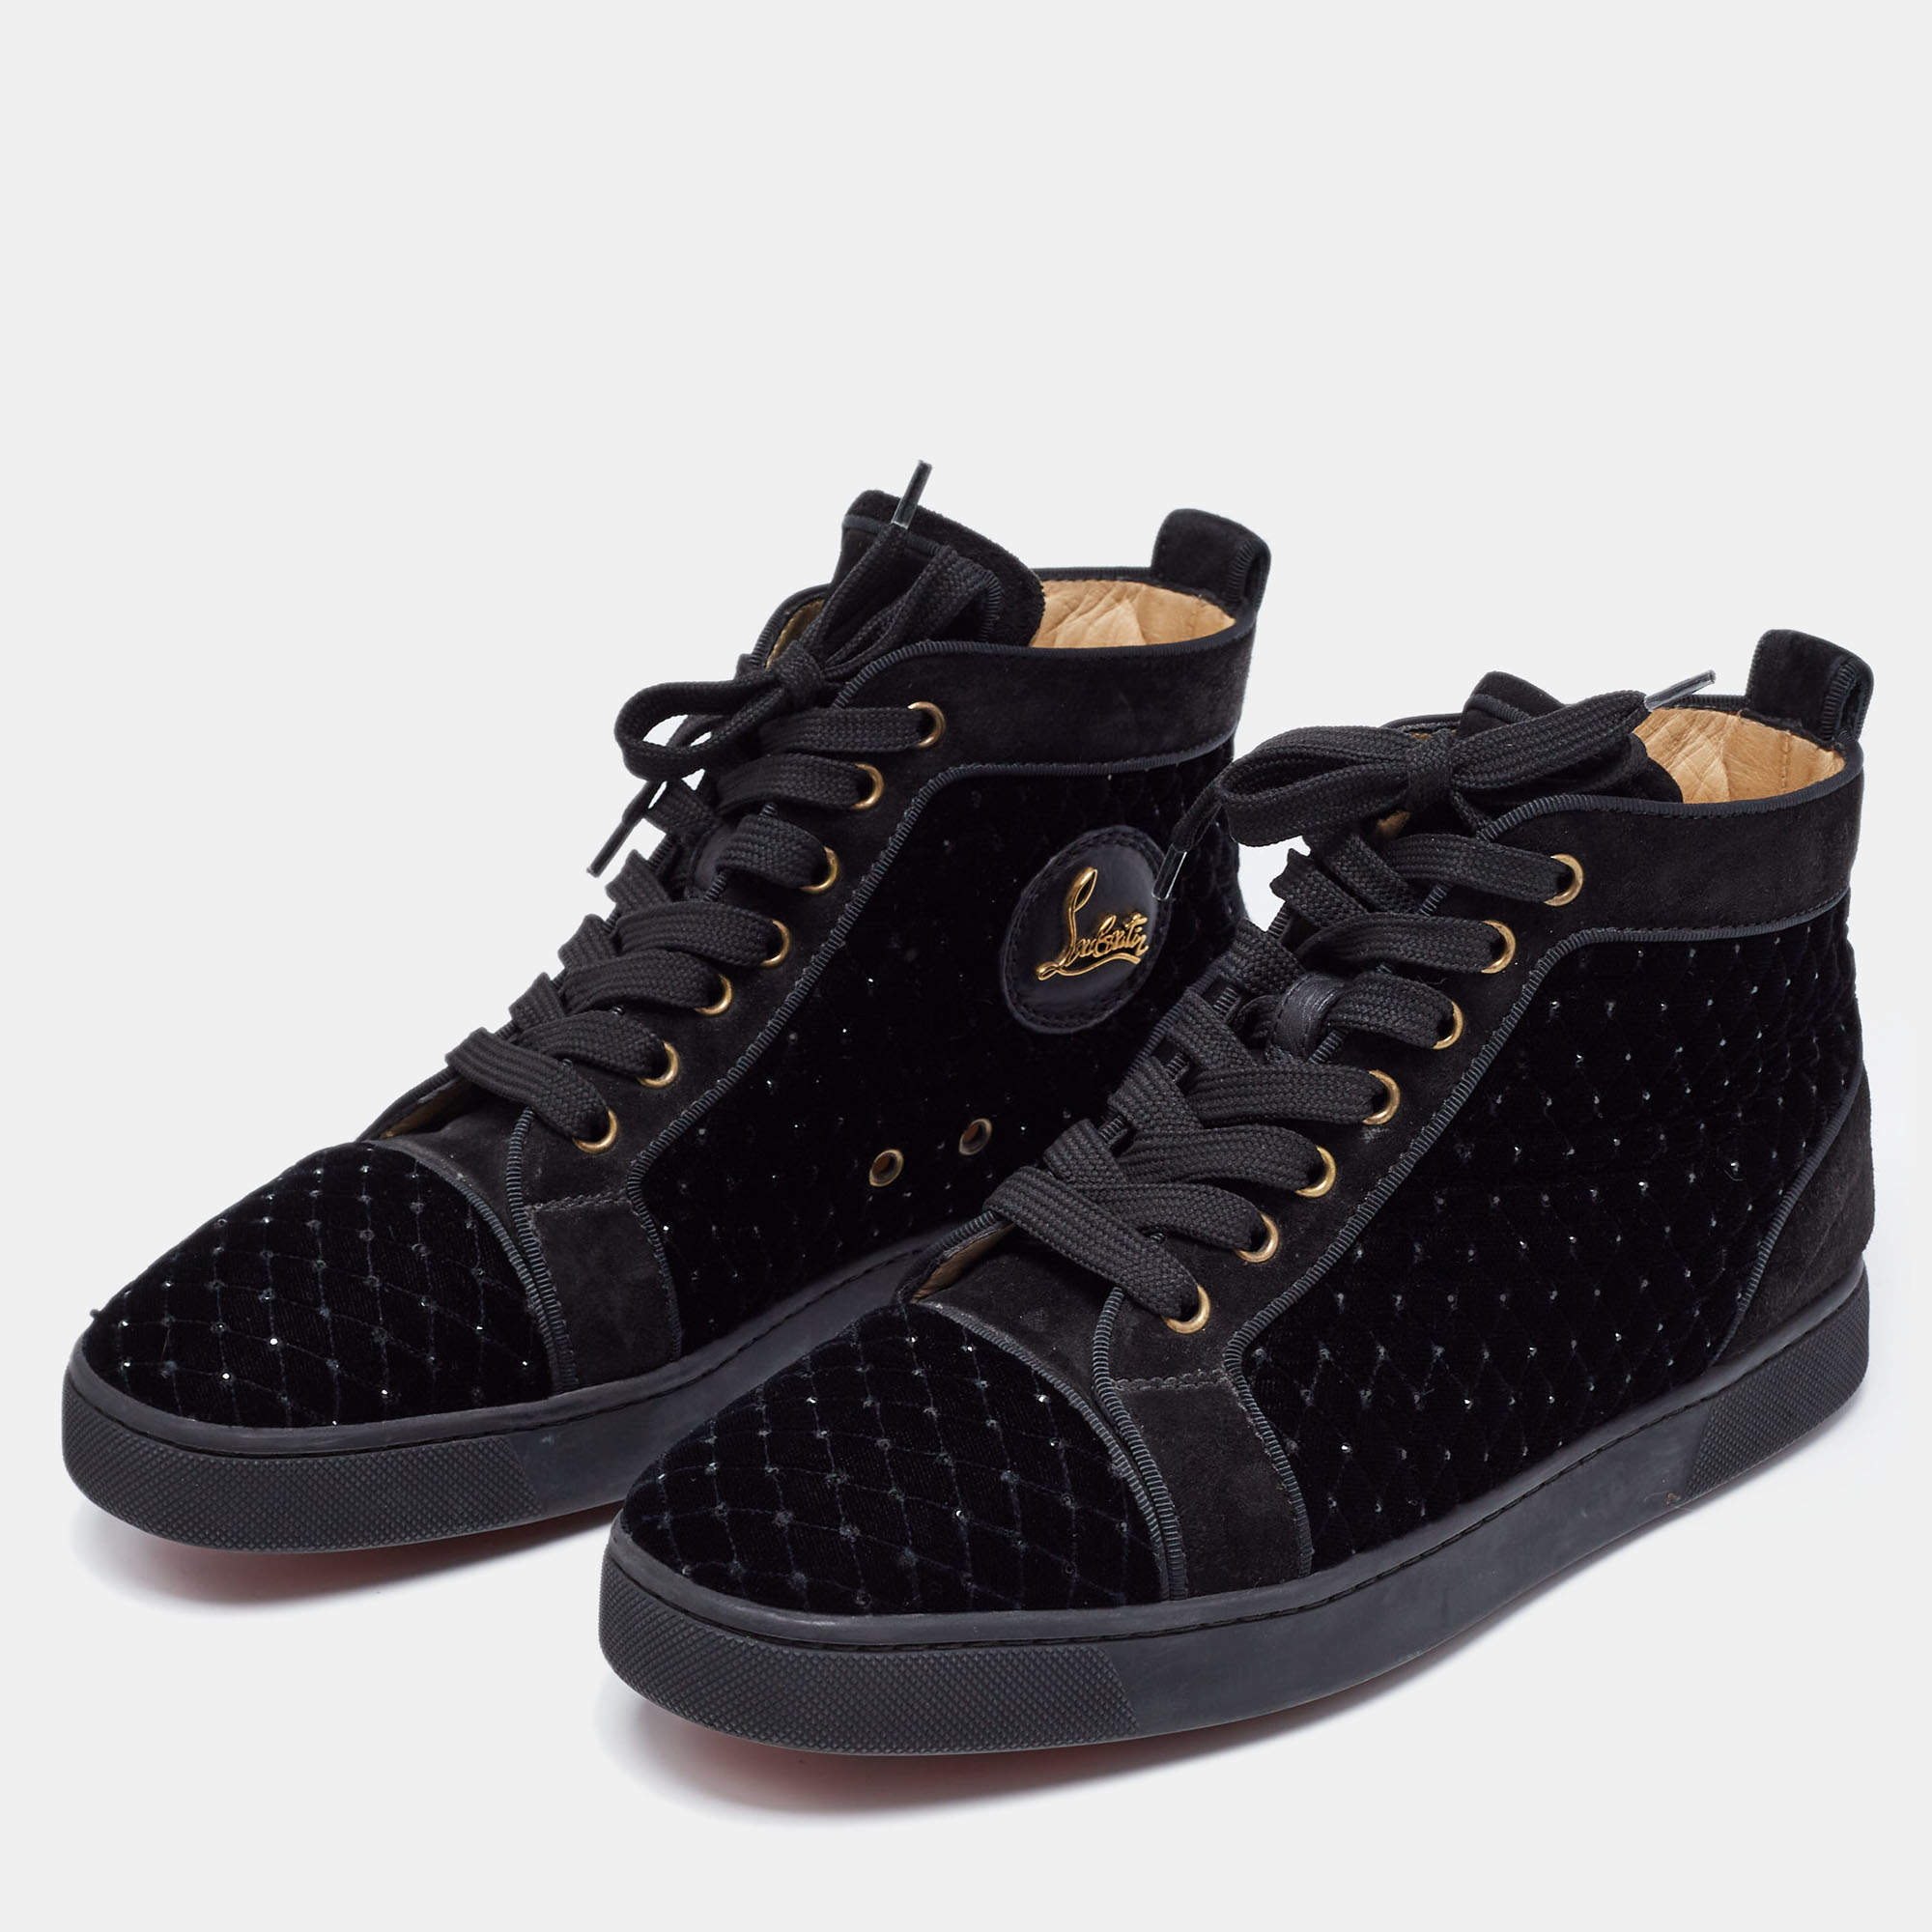 Louis Vuitton, Shoes, Christian Louboutin Black Spike Velvet Low Studded  Sneakers